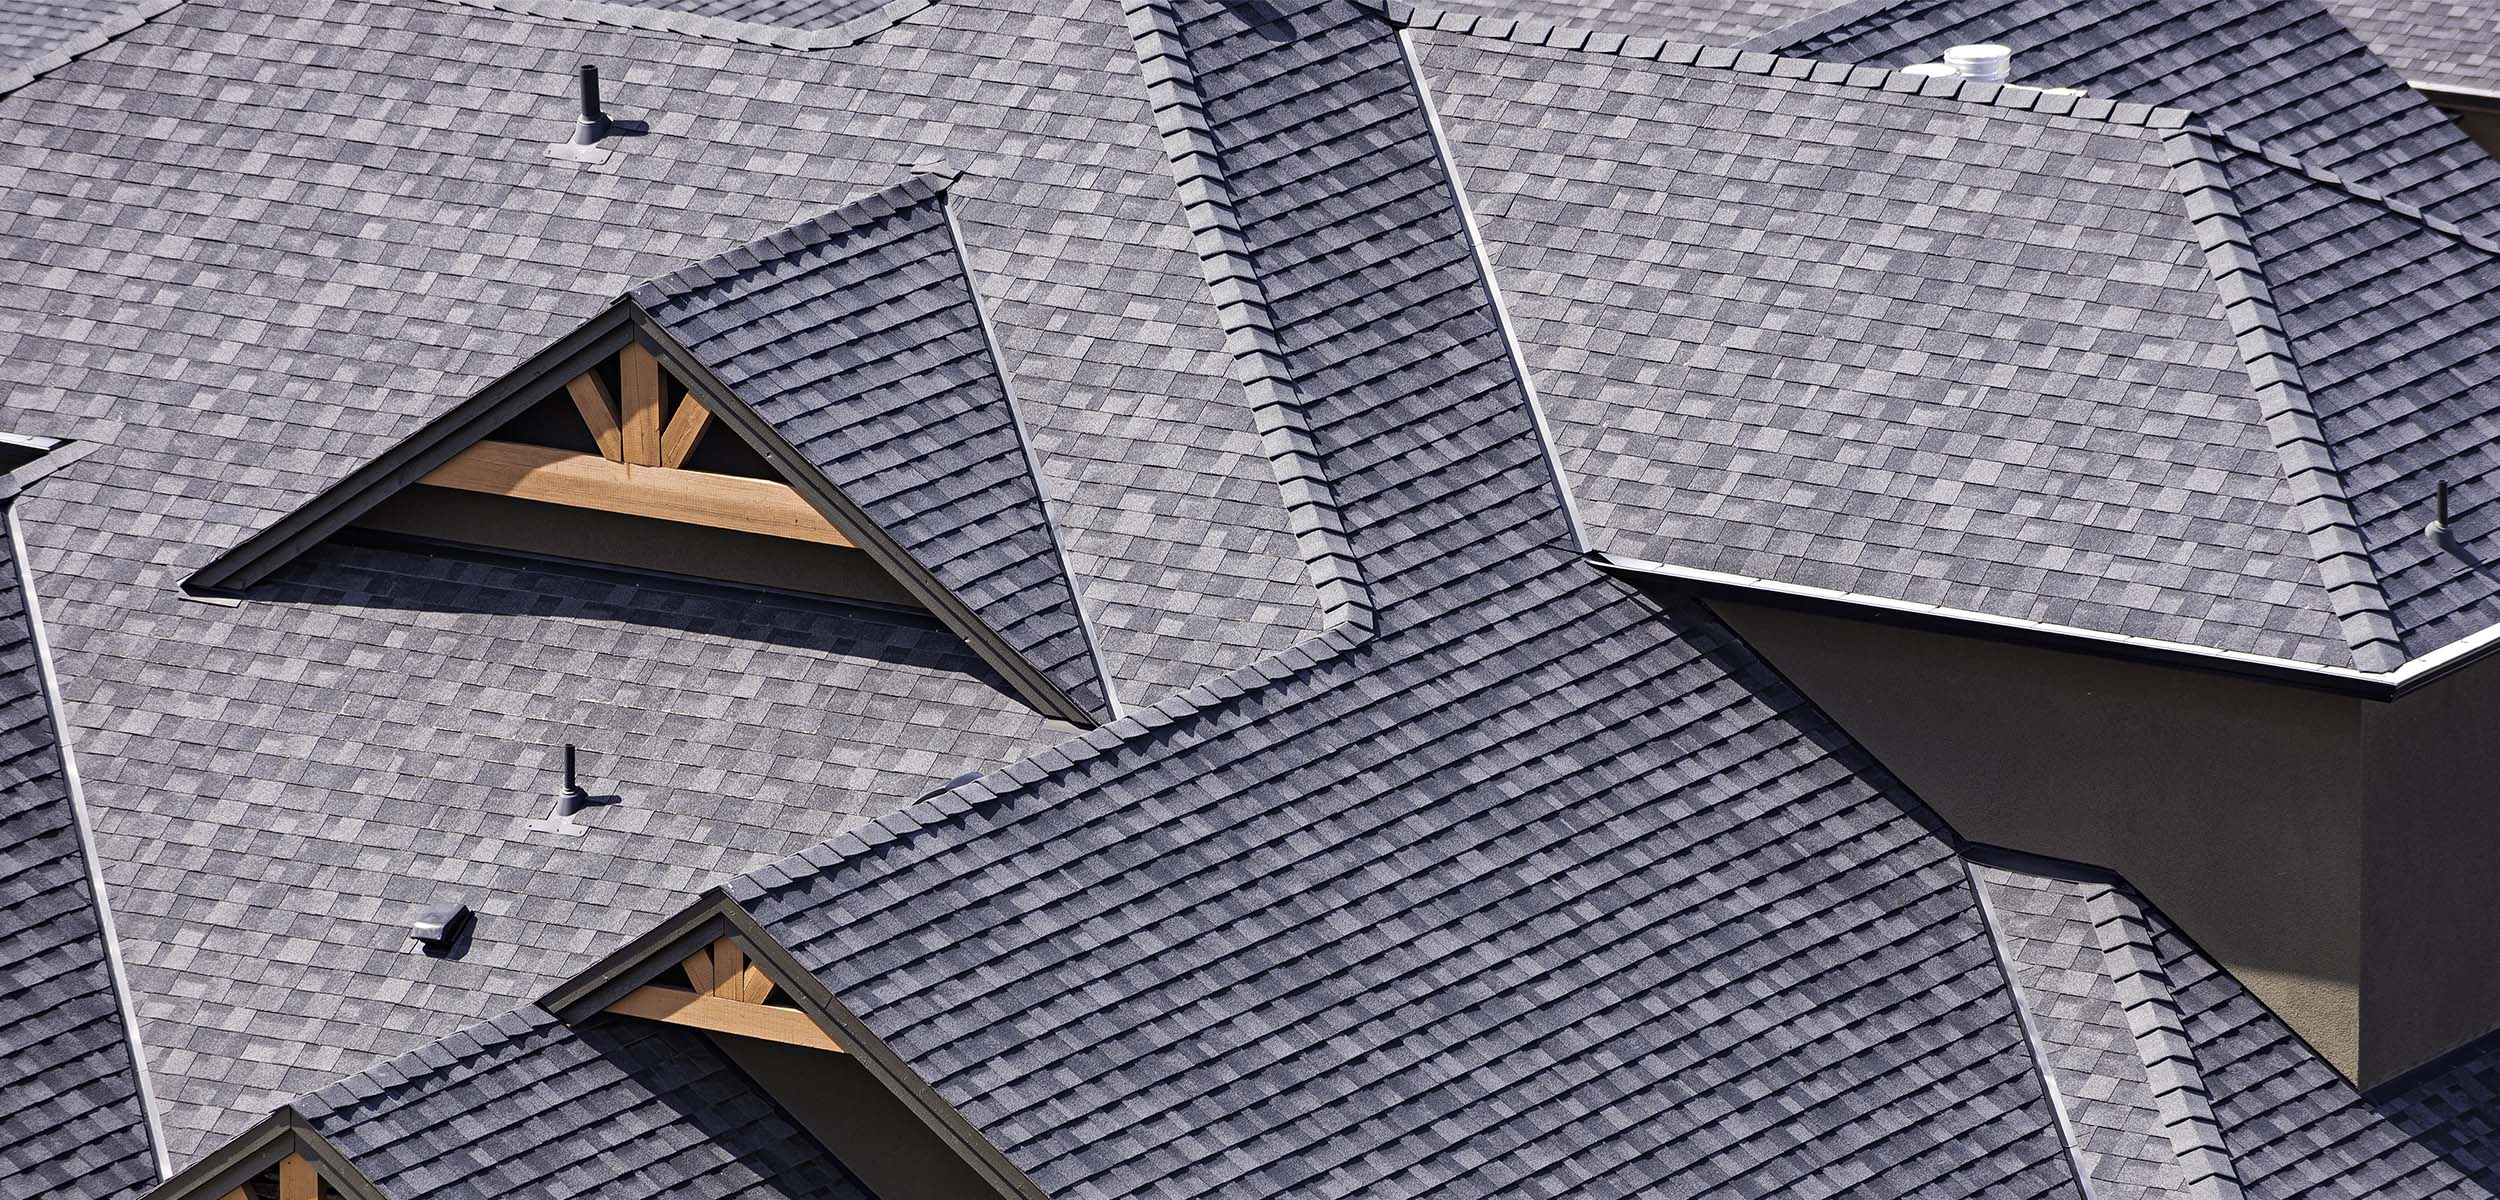 Quality Roofing Materials - Colorado Roofing Specialists